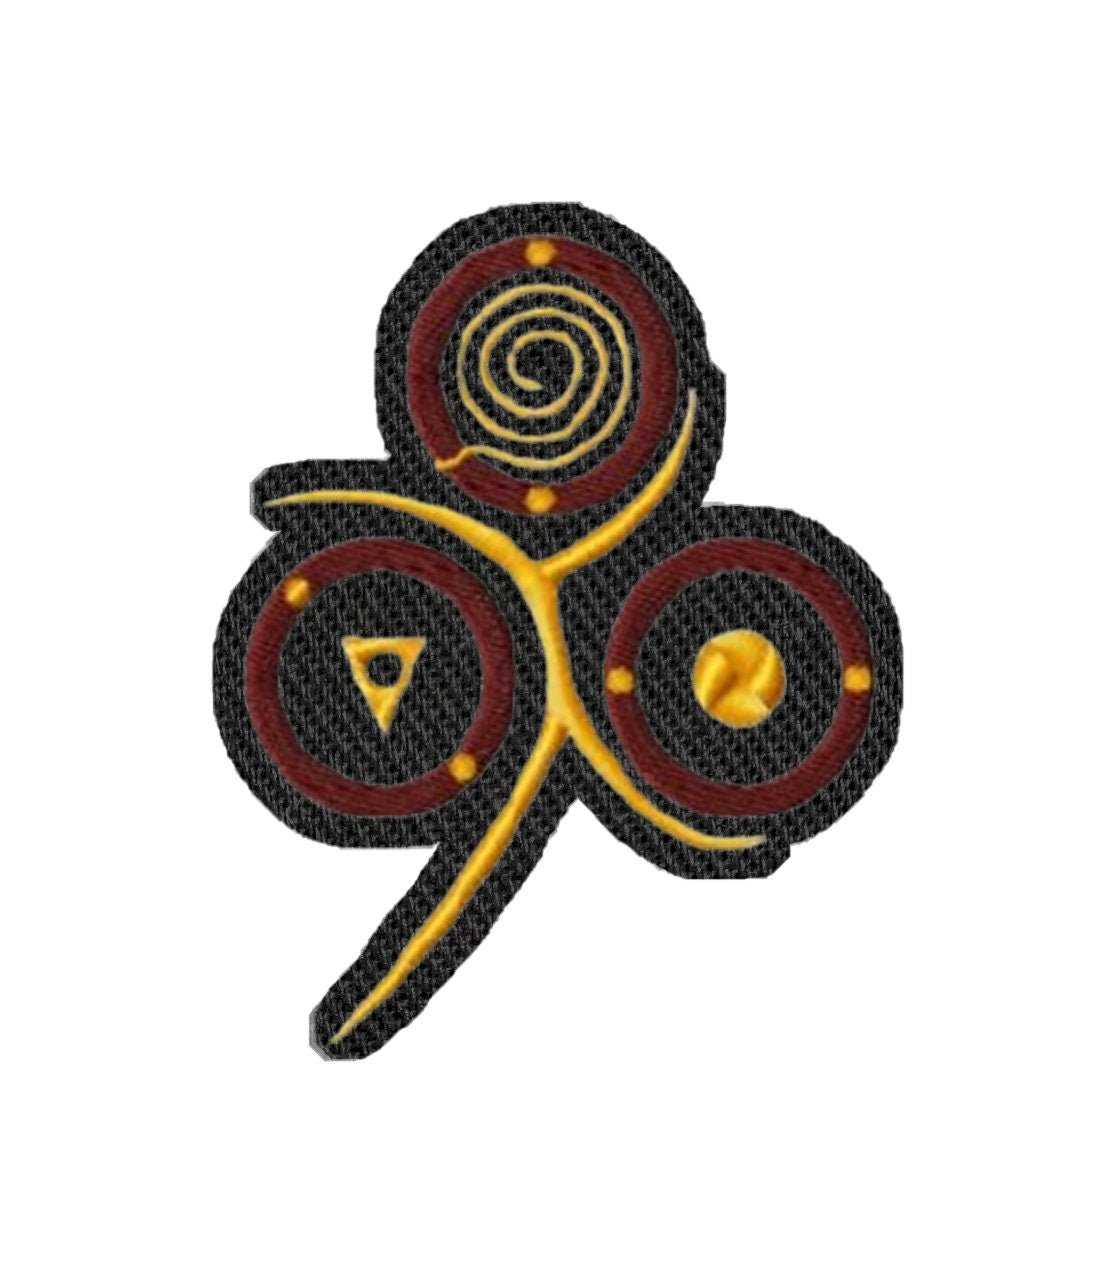 Abstract Iron on Patch / Sew on embroidered patches - Hobby & Sport Sewing Crafts Embroidery Women Applique Merit Badge for Clothing Jacket